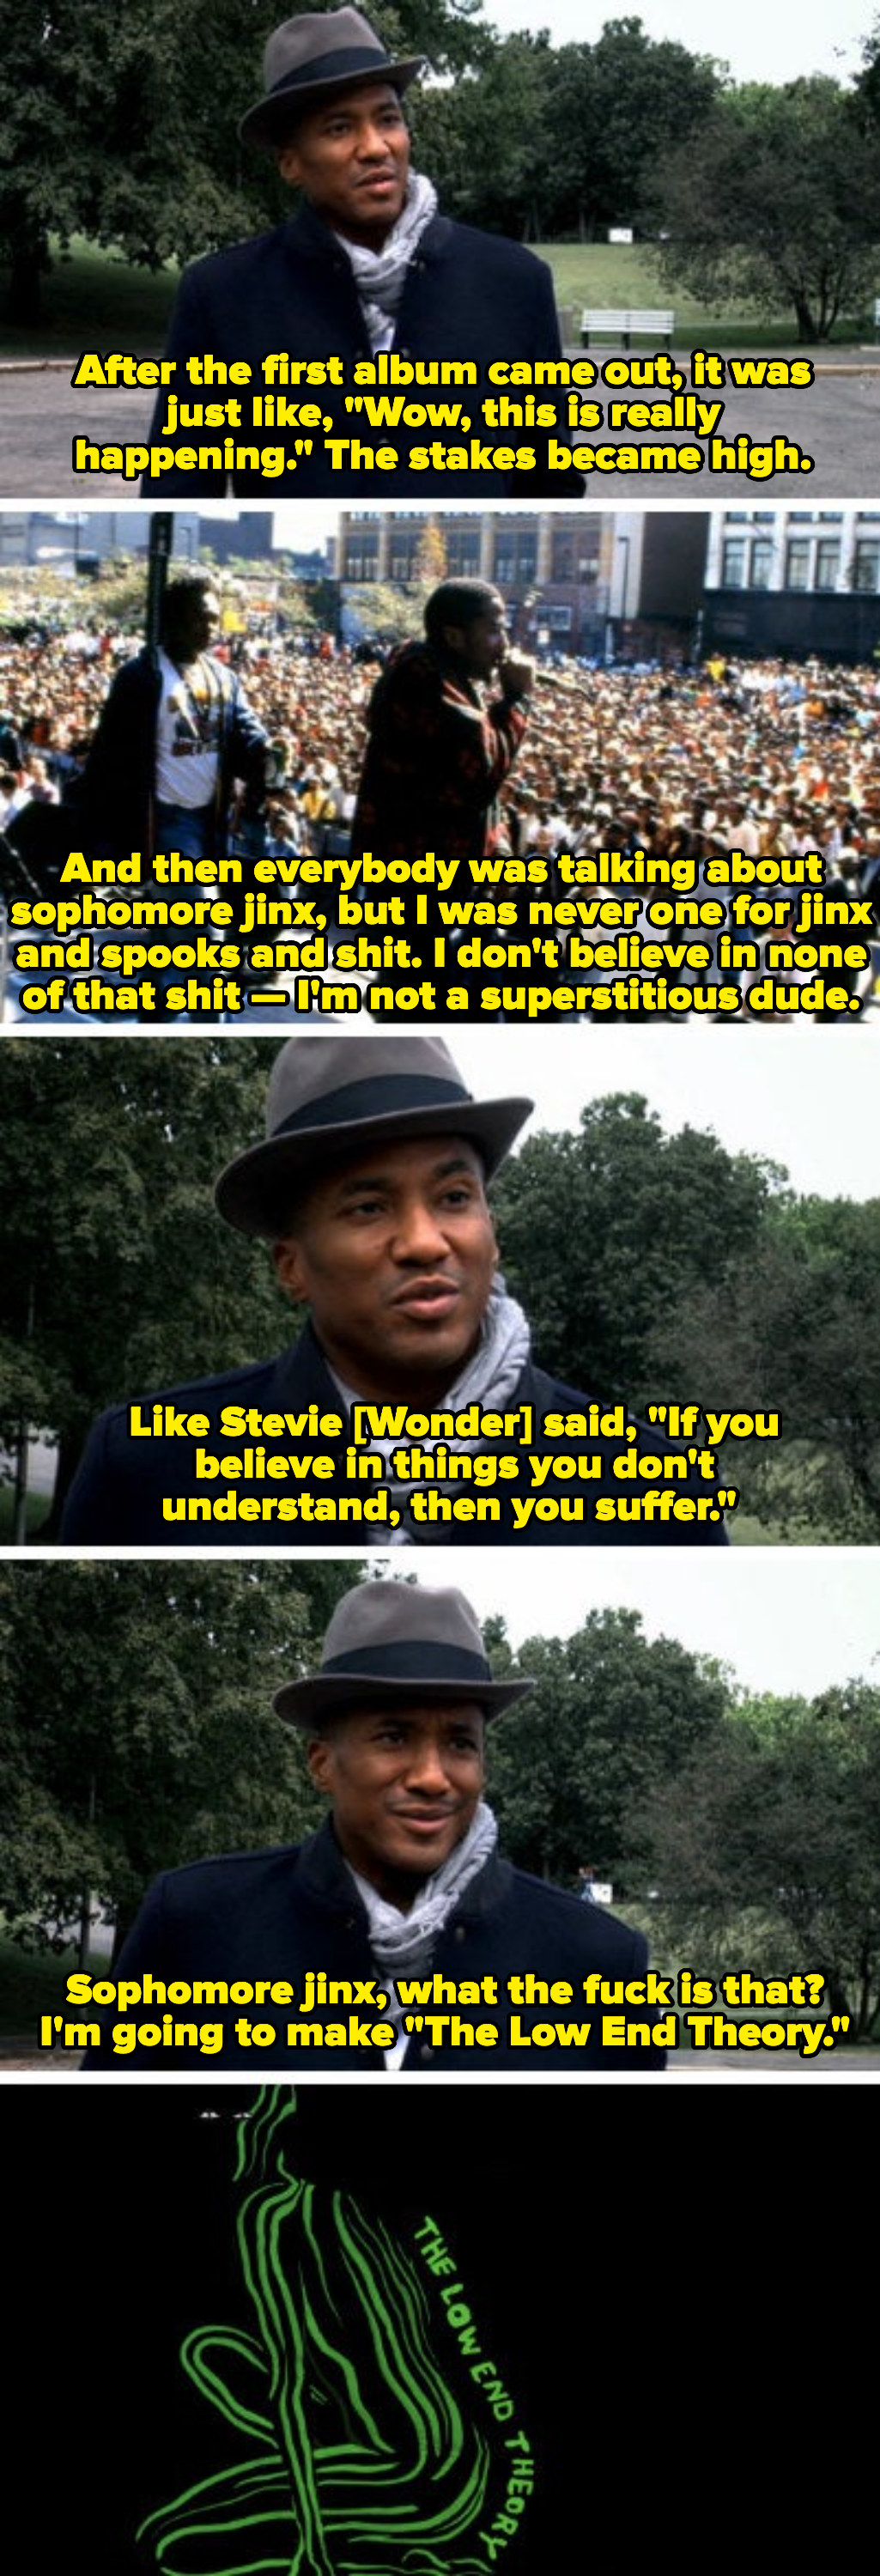 Q-Tip discussing his disbelief in sophomore jinx, saying: &quot;Like Stevie Wonder said, &#x27;If you don&#x27;t believe in things you don&#x27;t understand, then you suffer.&#x27; Sophomore jinx, what the fuck is that? I&#x27;m going to make &#x27;The Low End Theory&#x27;&quot;